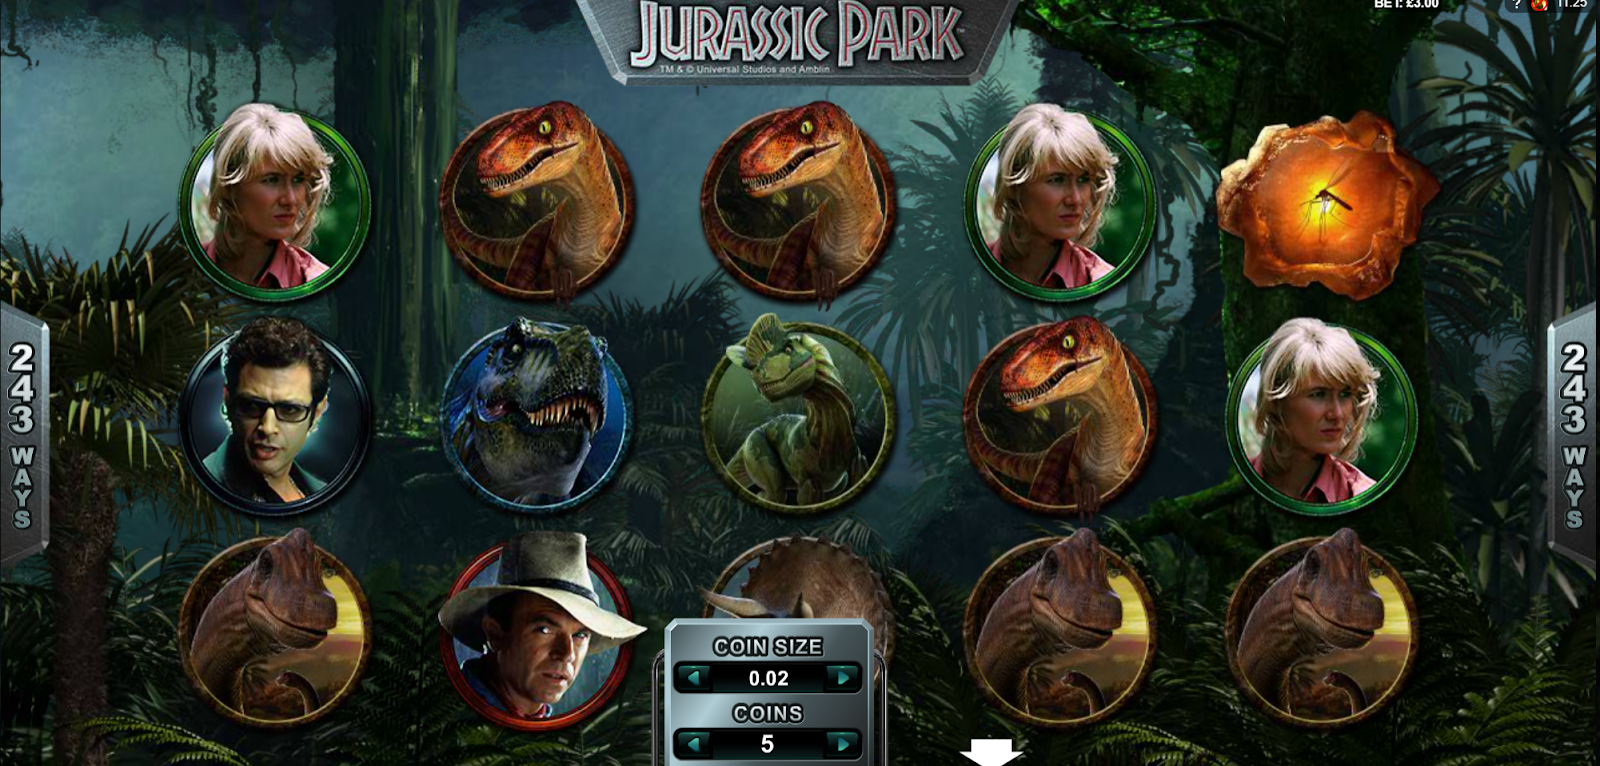 Jurassic Park is one of the many great slots games you can play at Casino Gods